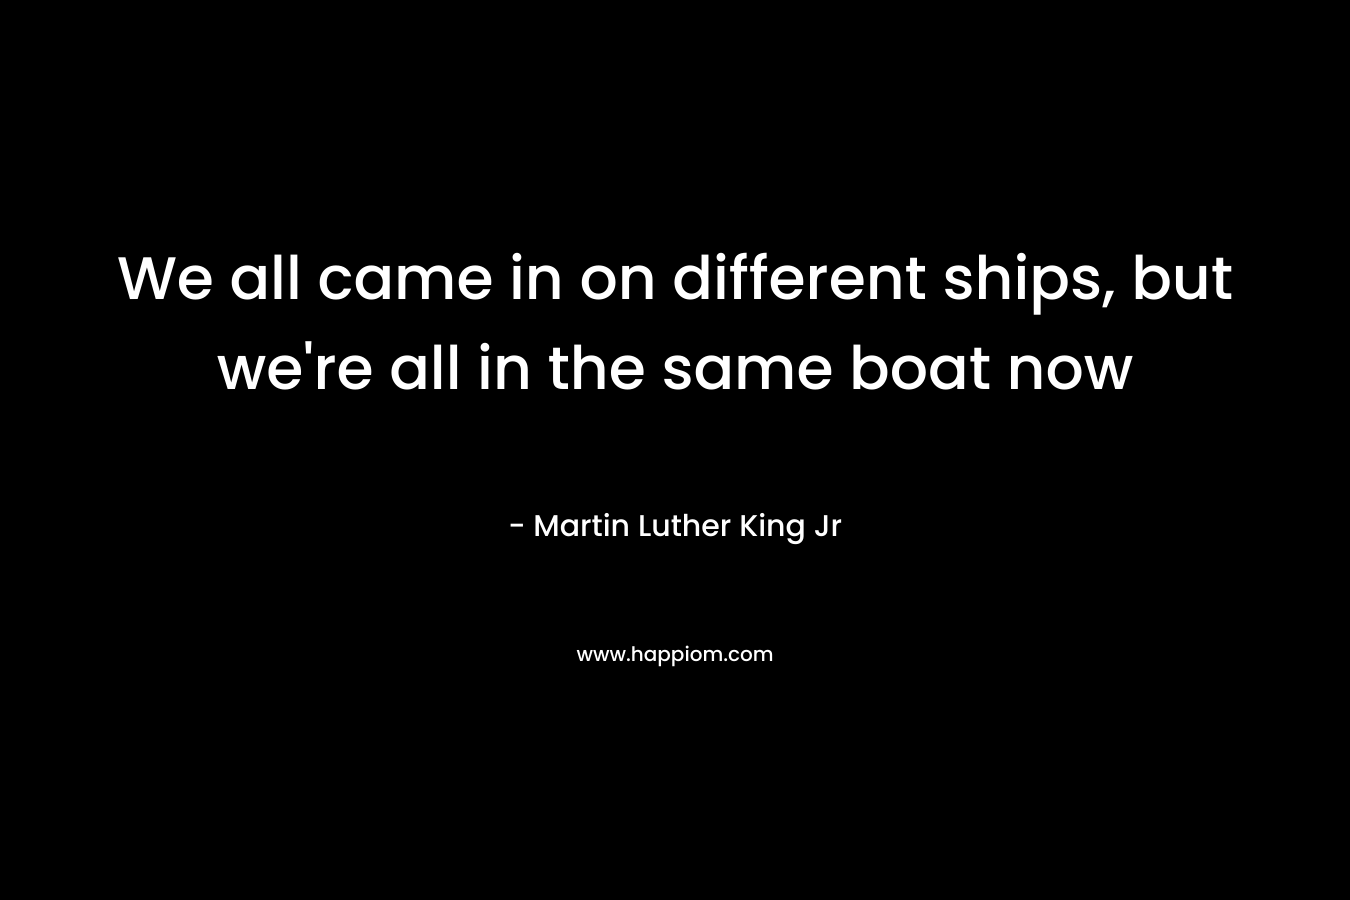 We all came in on different ships, but we’re all in the same boat now – Martin Luther King Jr